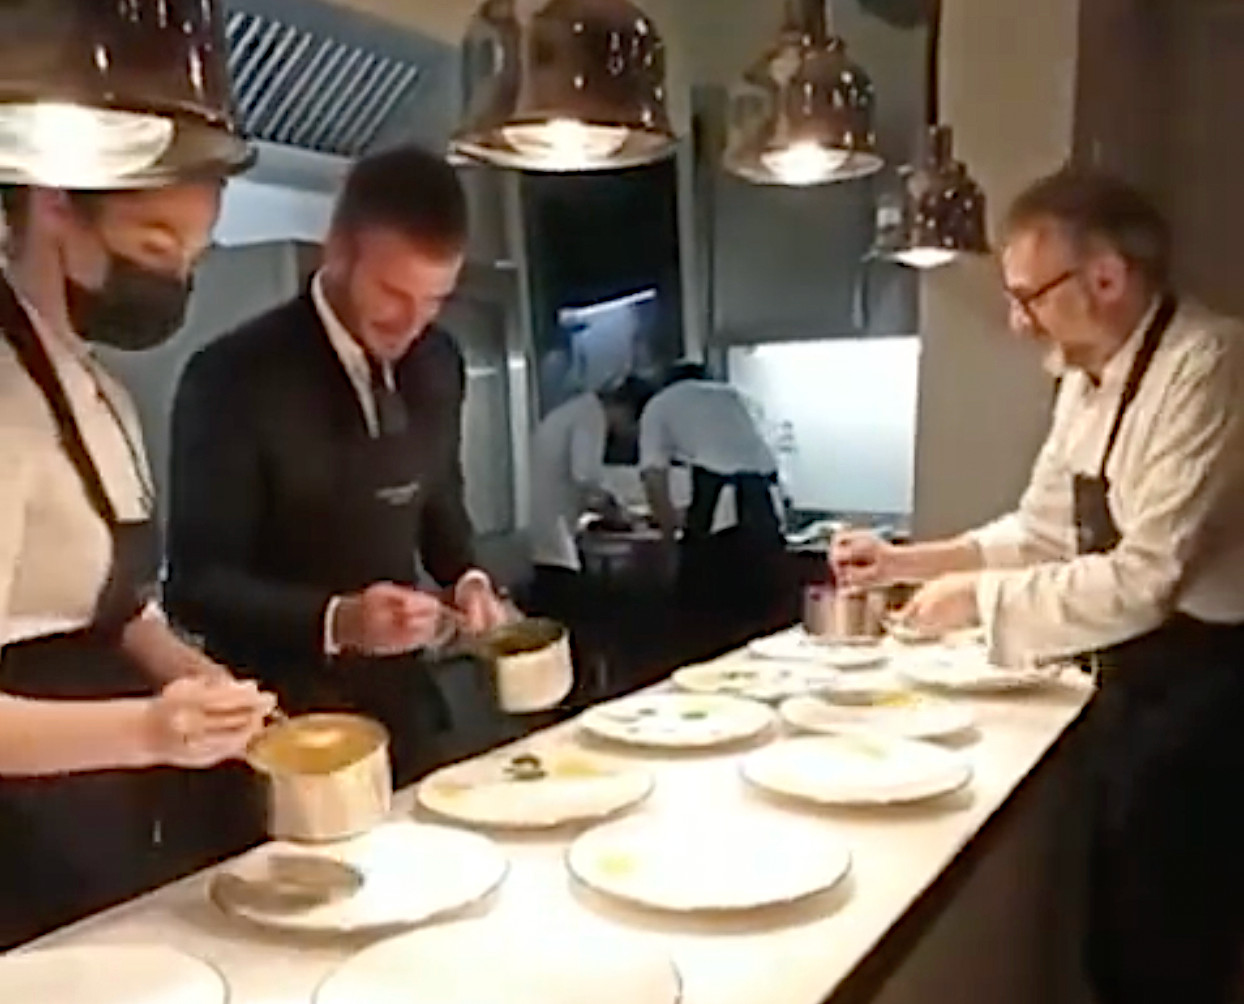 Bottura and Beckham plating up together. A still from Massimo's Instagram video